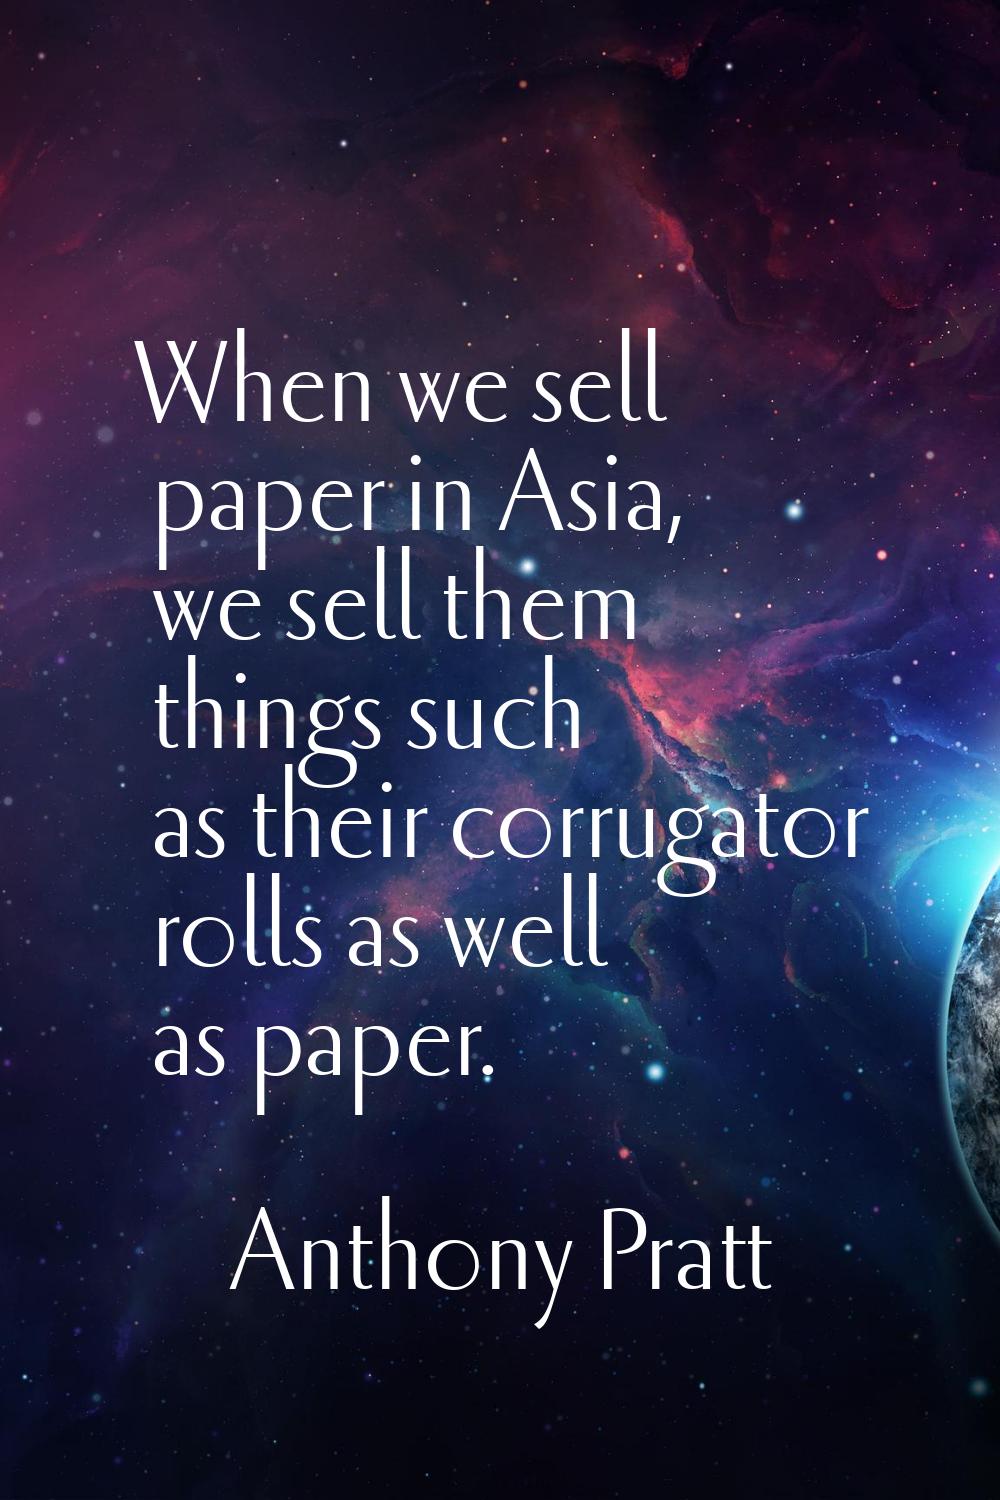 When we sell paper in Asia, we sell them things such as their corrugator rolls as well as paper.